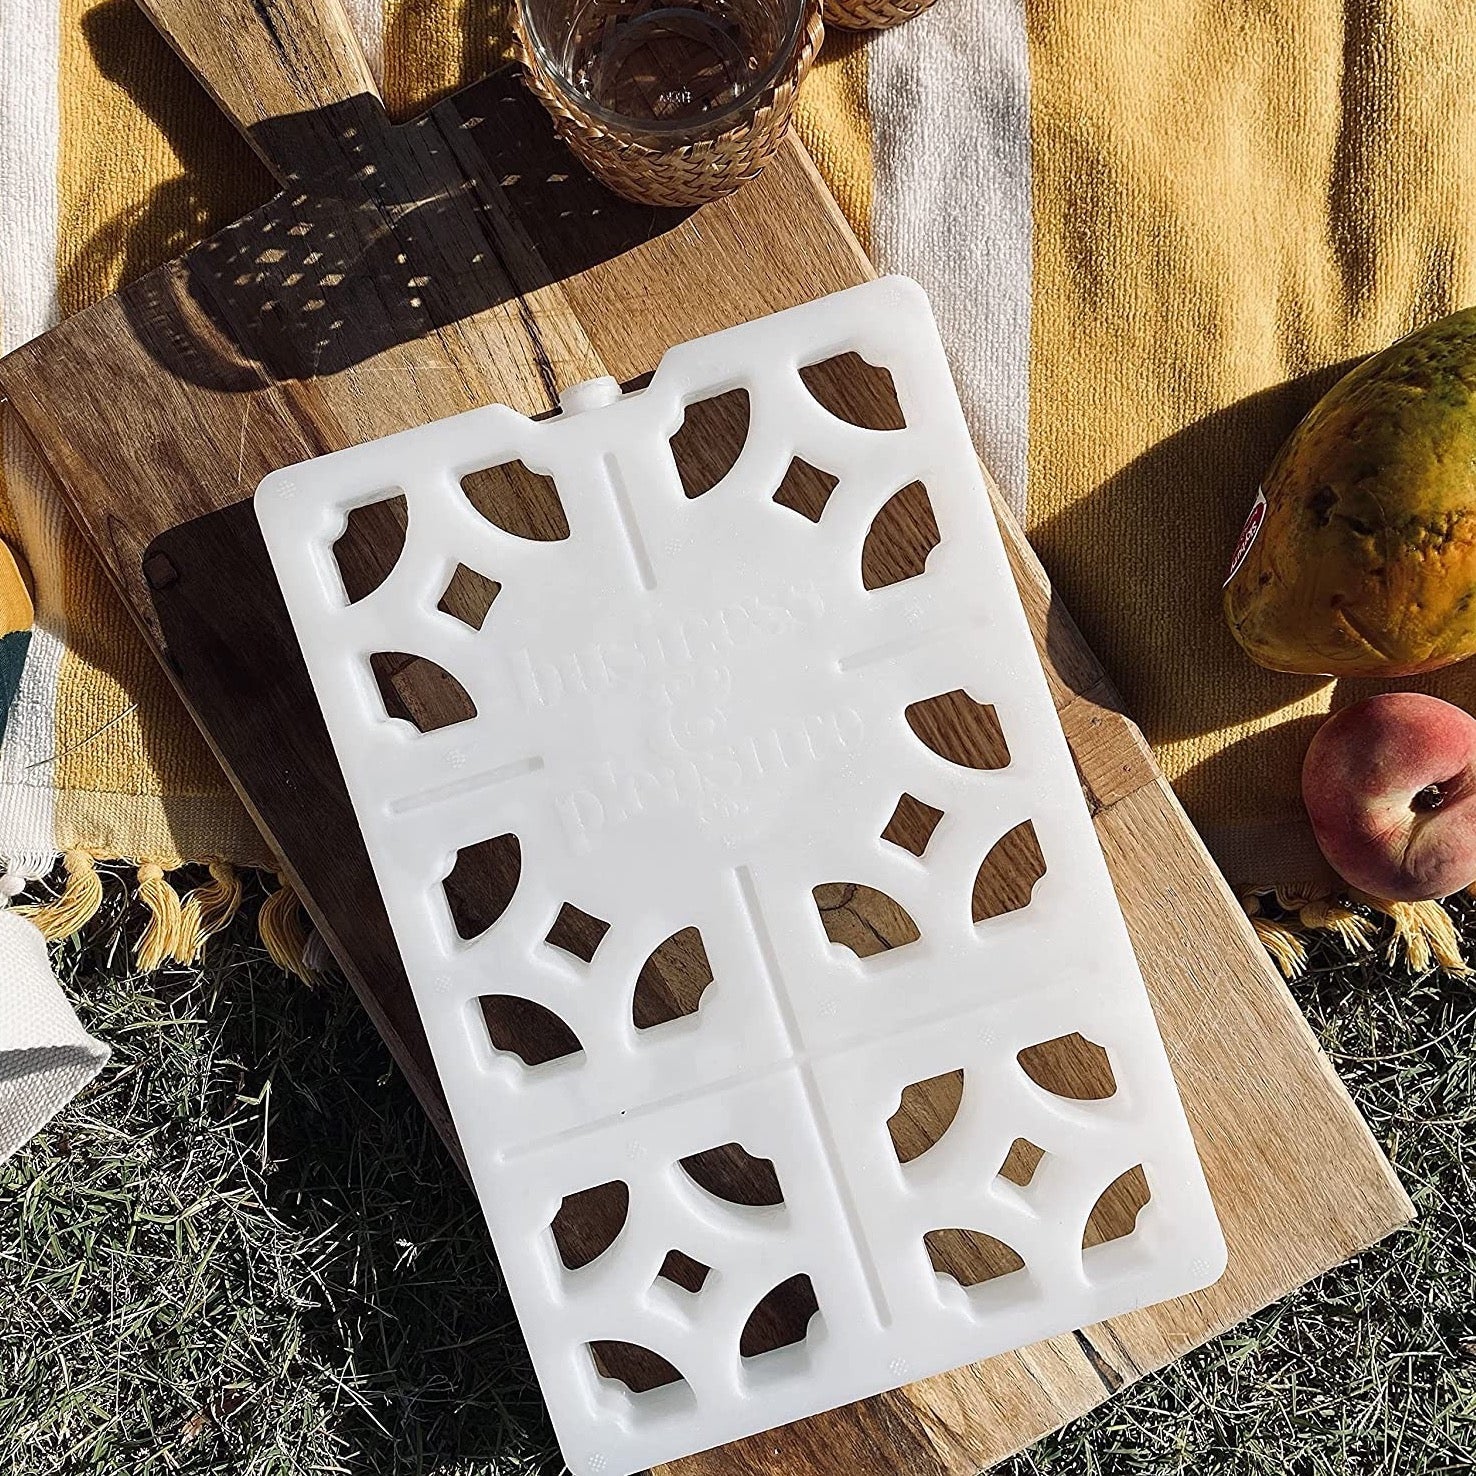 white breeze block ice pack on piece of wood in a picnic setting. Ice pack has cut outs resembling mosaic pattern